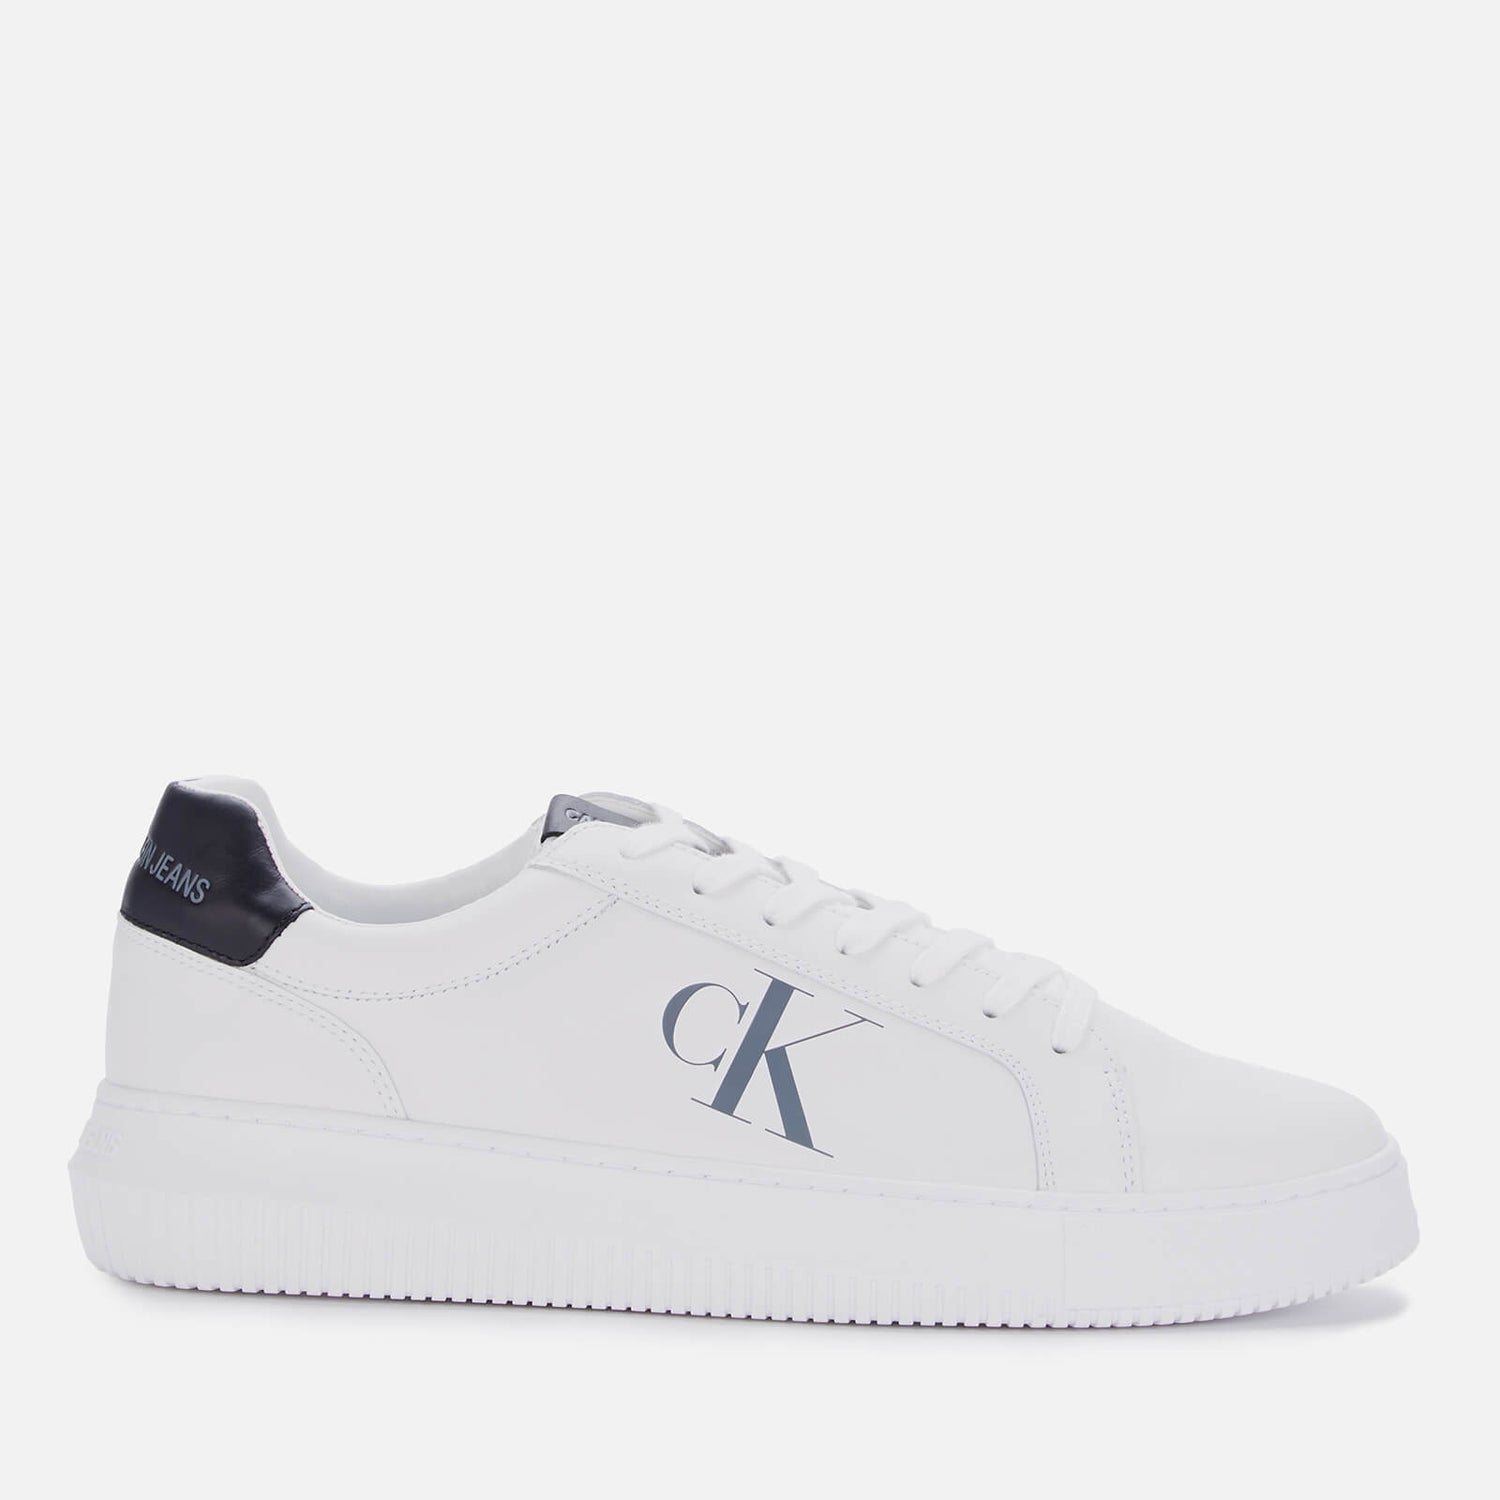 Calvin Klein Jeans Men's Chunky Leather Cupsole Trainers - Bright White